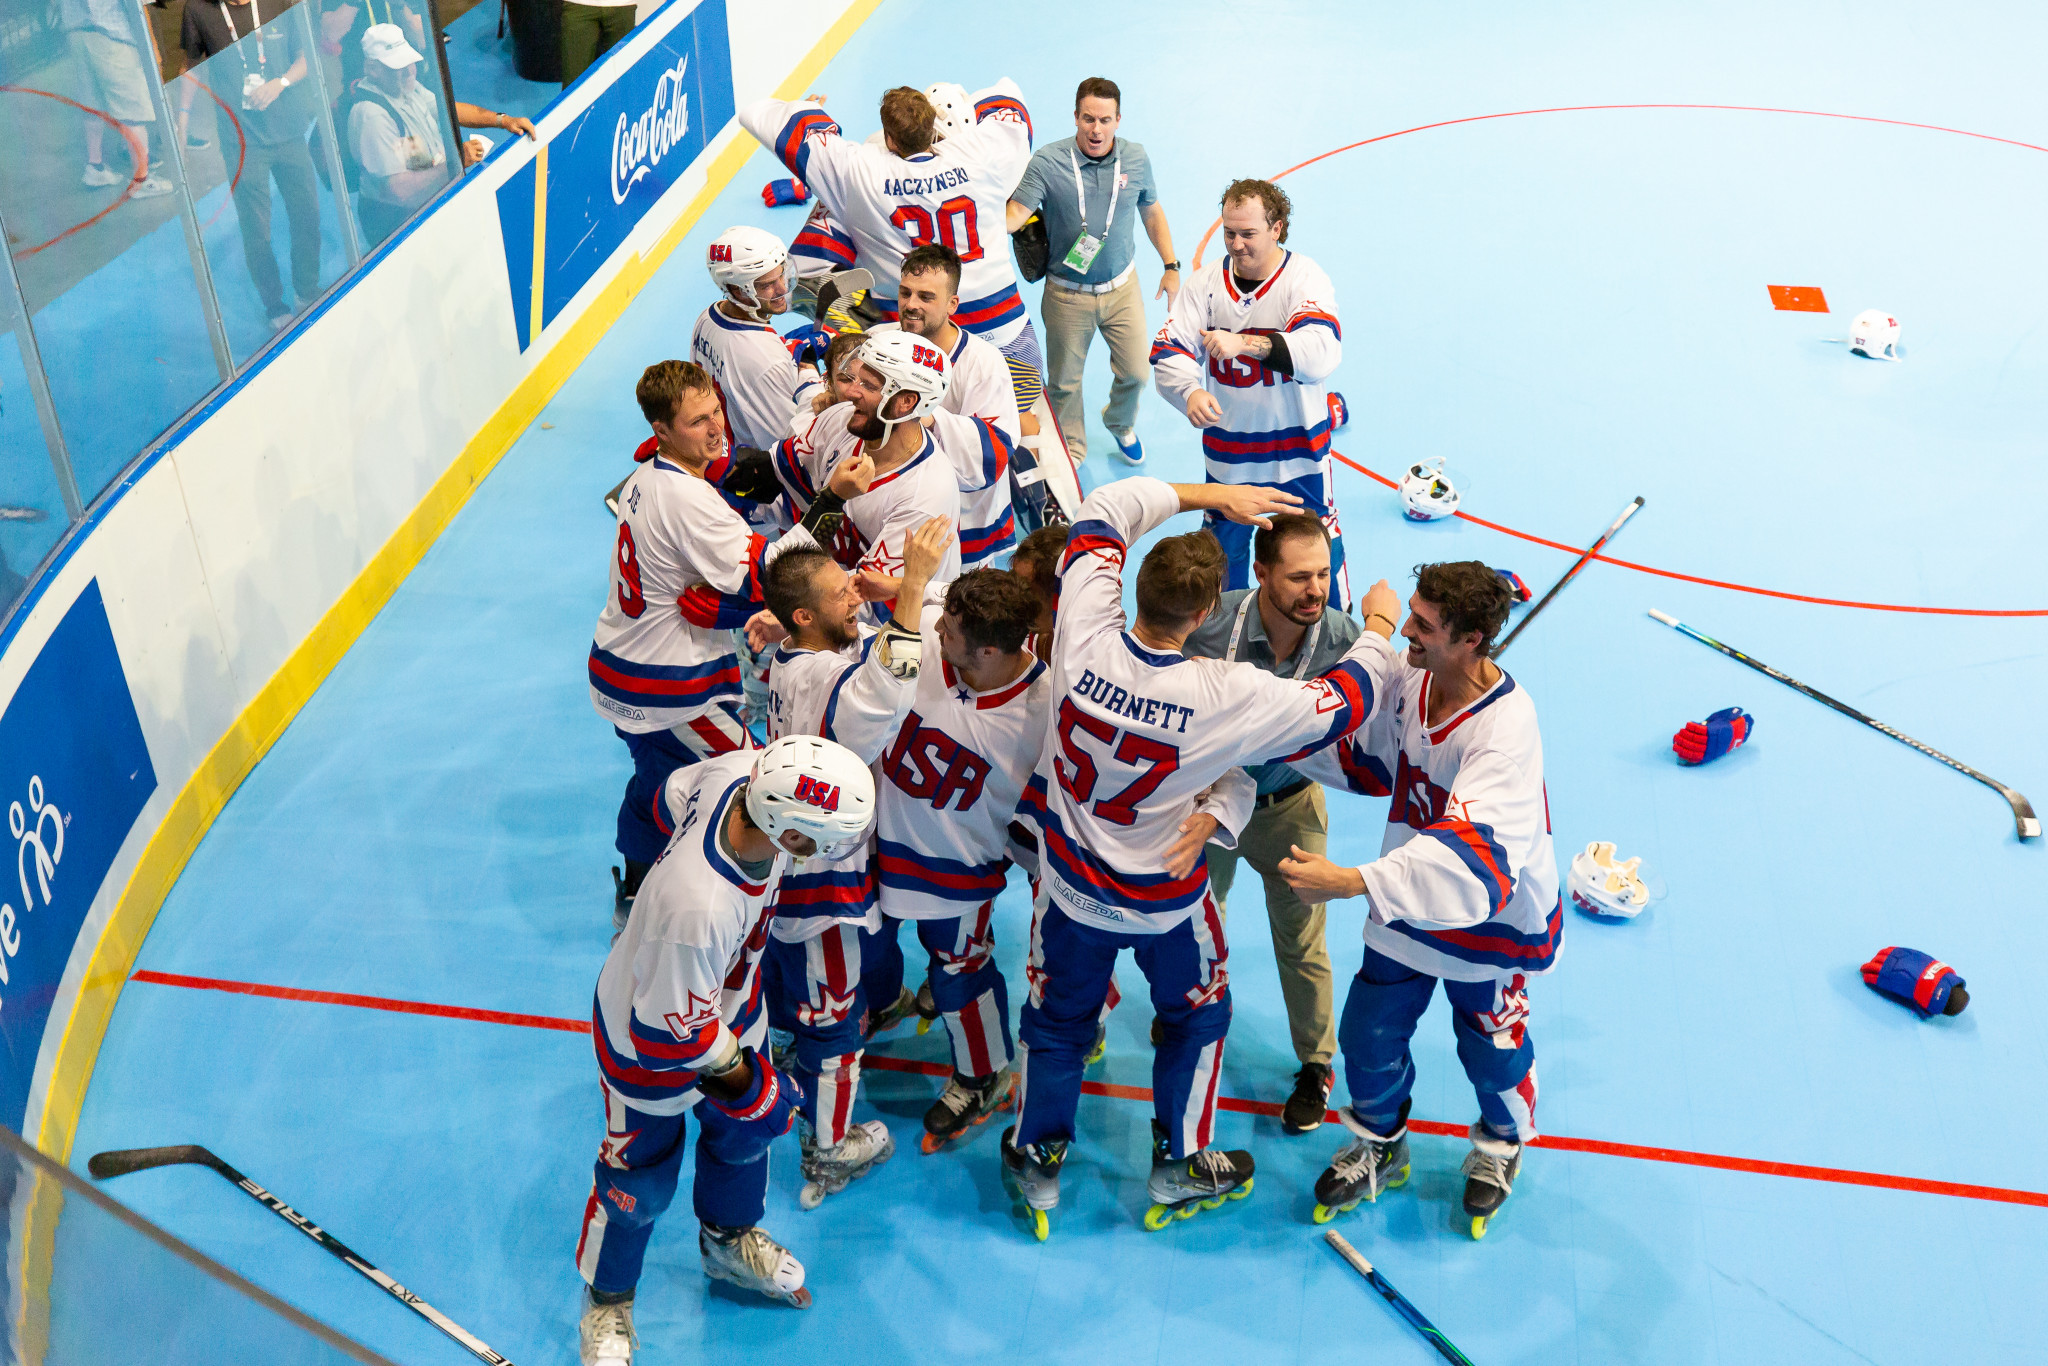 Hosts the United States won men's roller inline hockey gold by beating the Czech Republic 2-1 in the final ©Seth James photography/The World Games 2022